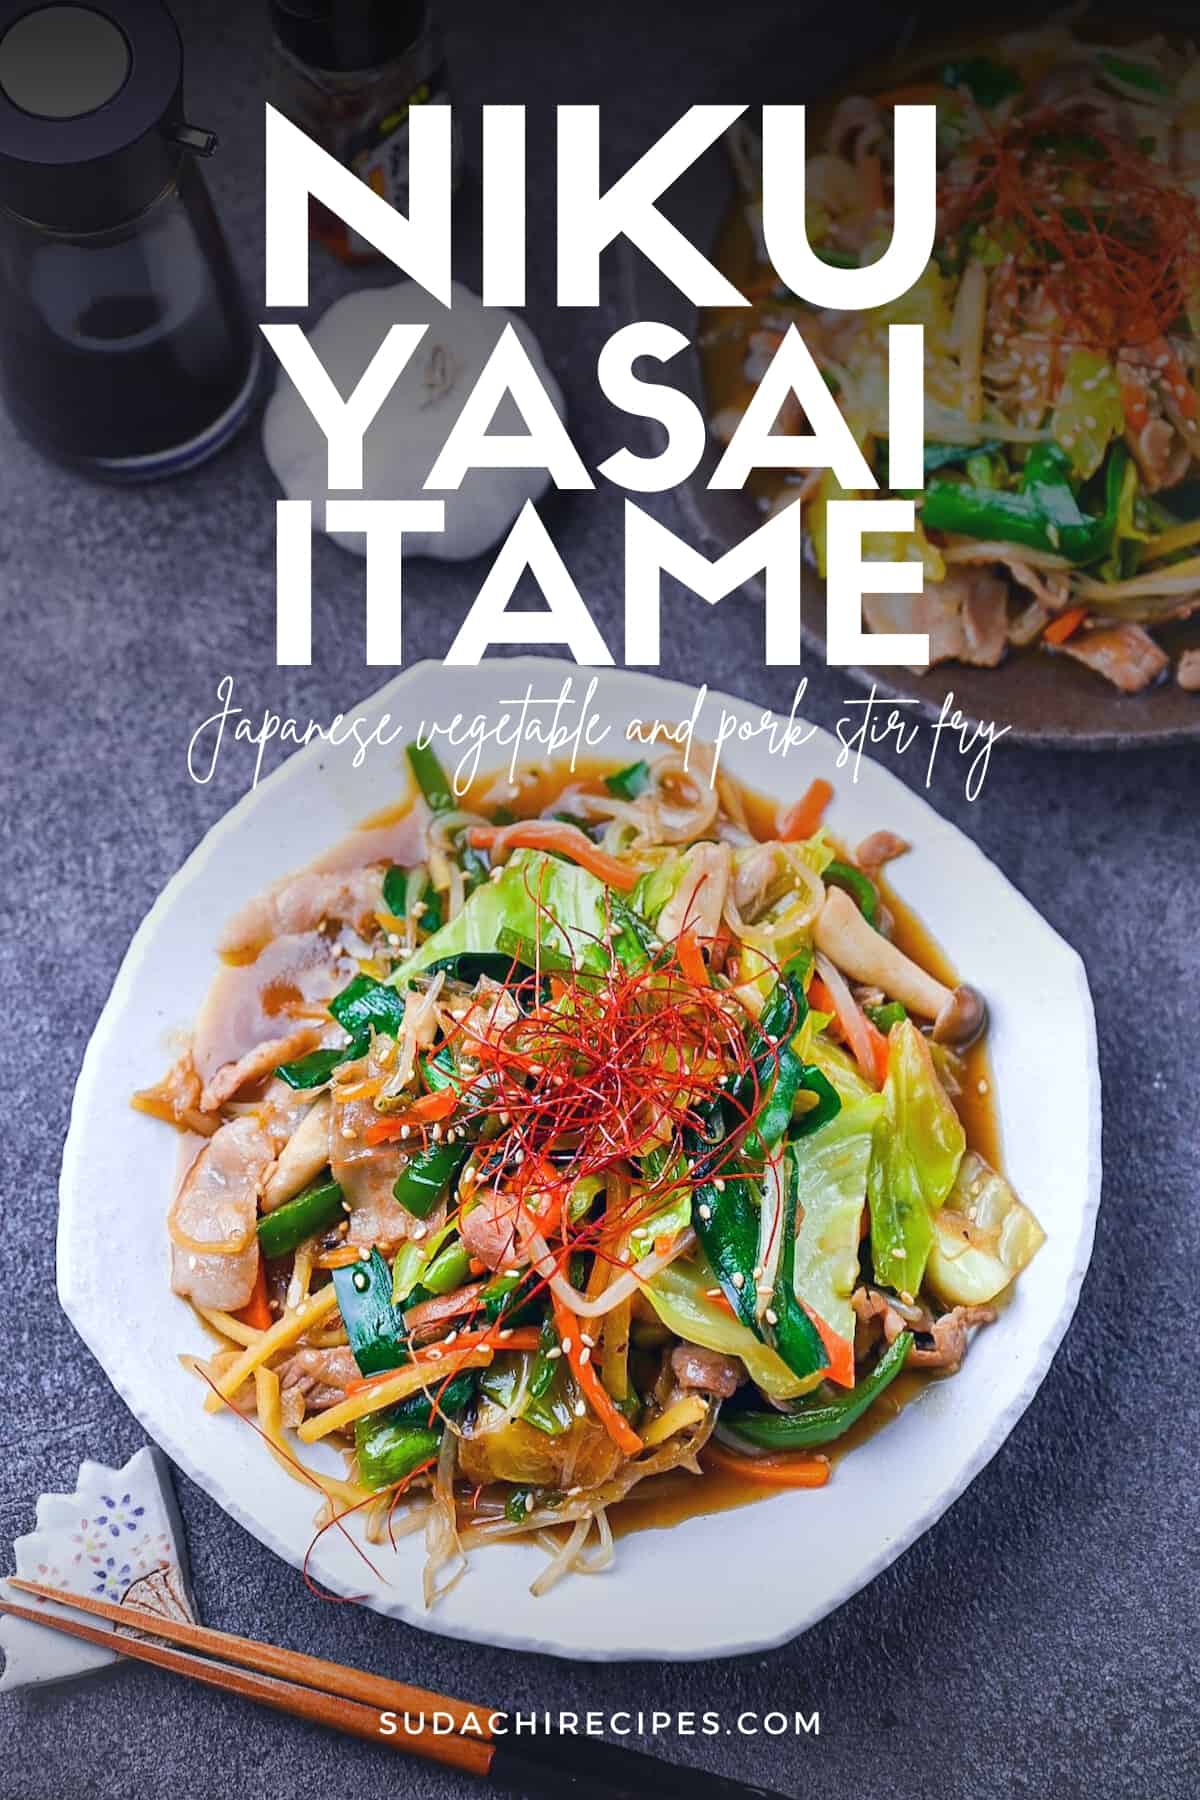 Niku Yasai Itame served on a white plate and topped with chili threads (Japanese style vegetable stir fry with pork)